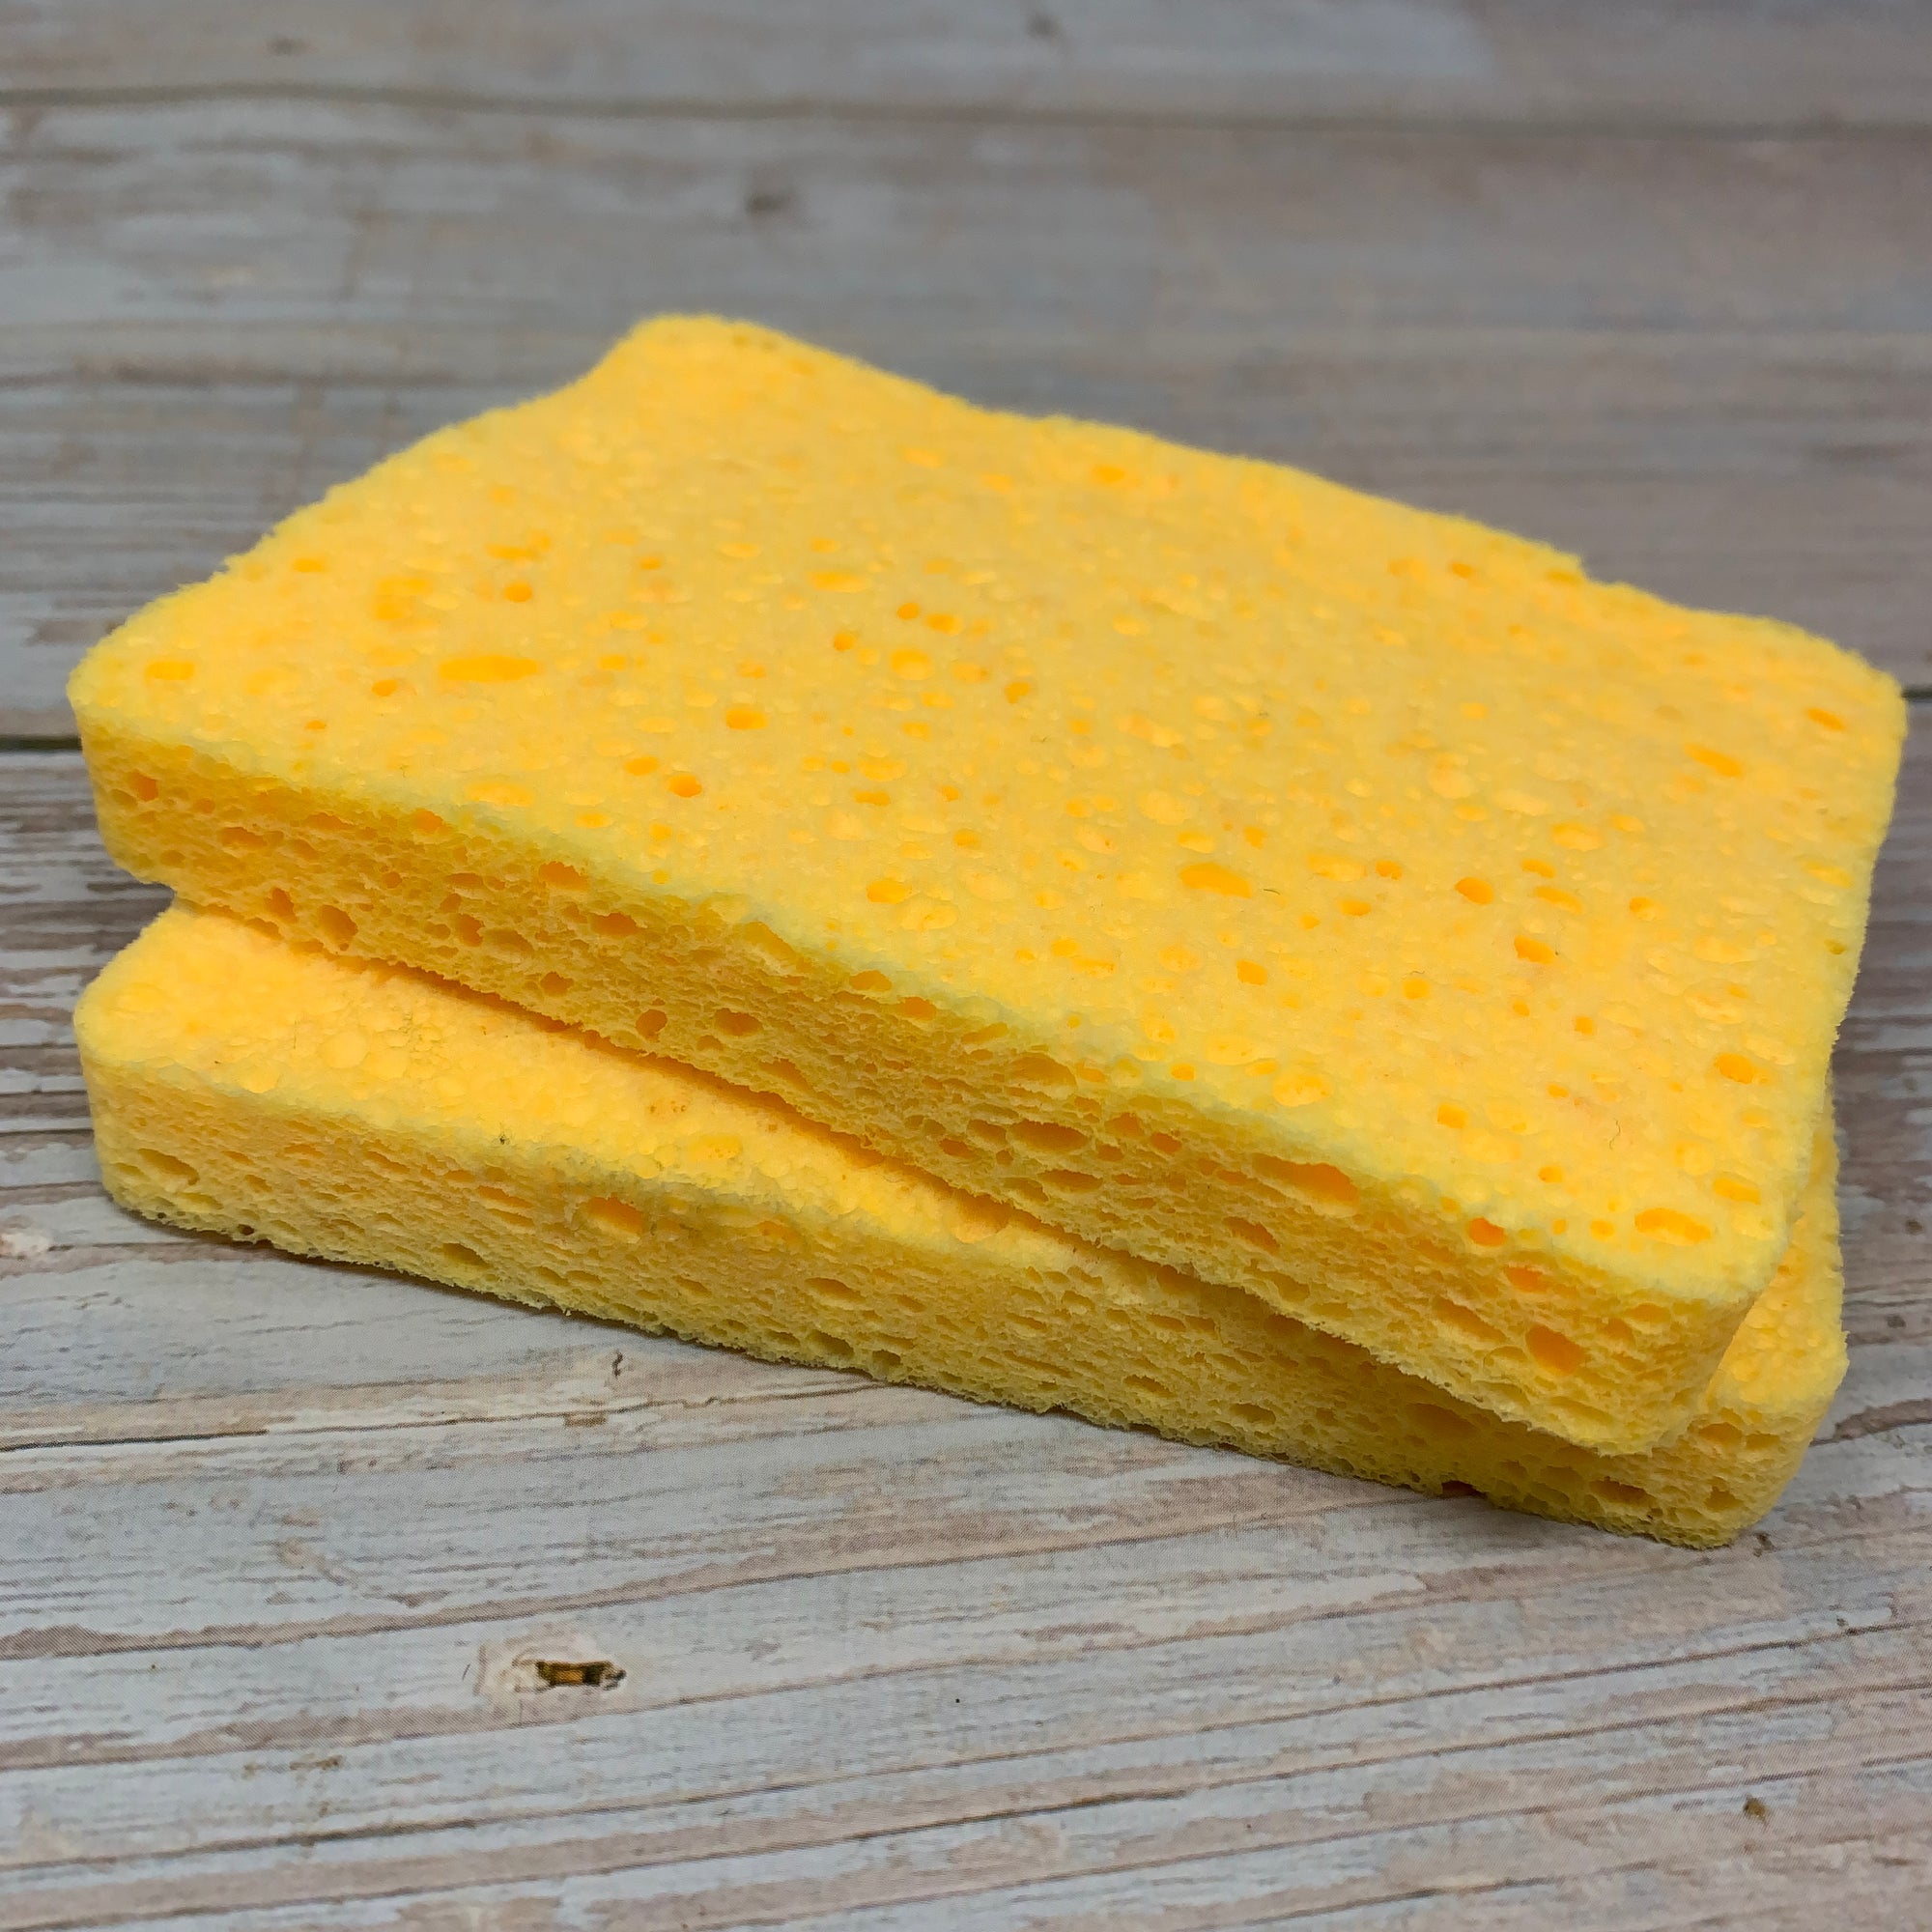 yellow cellulose sponge that are plastic free and eco-friendly